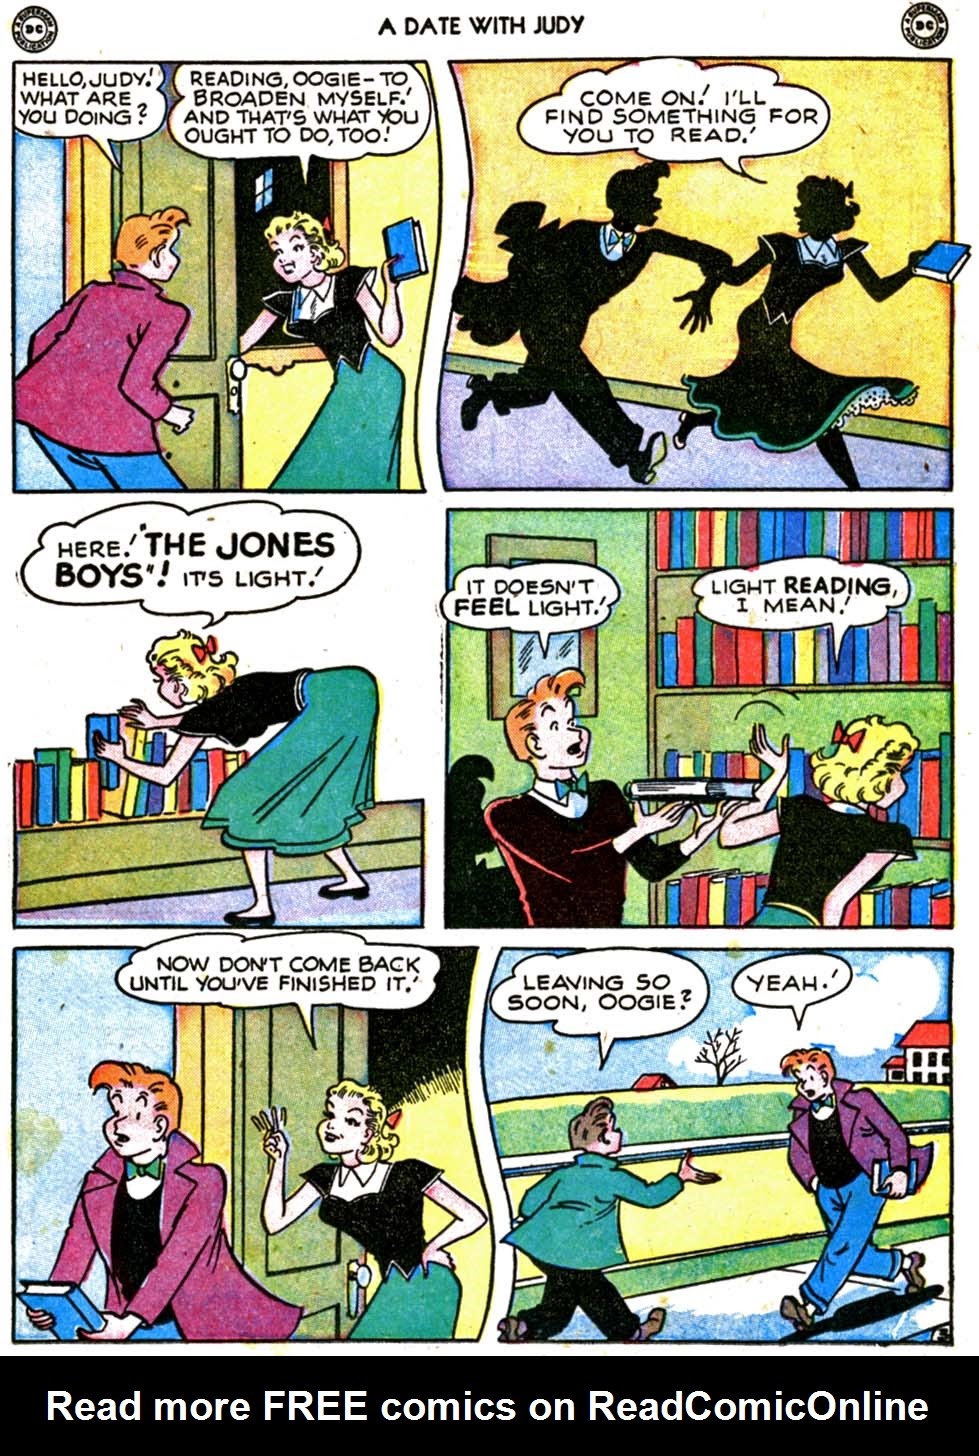 Read online A Date with Judy comic -  Issue #10 - 21